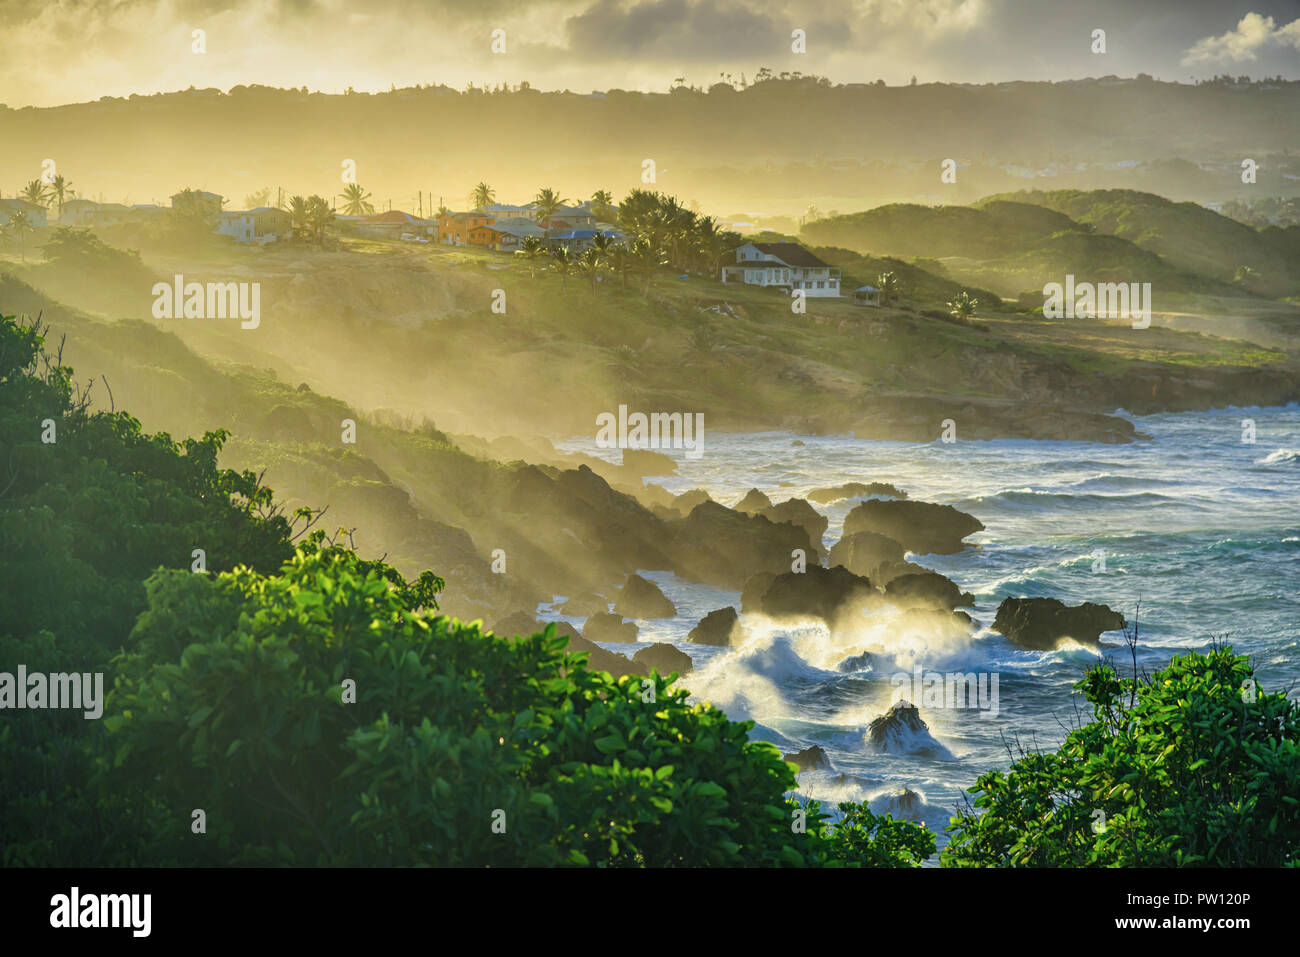 Water spray hitting the land after strong waves splash on the rock, sunset at Ragged point in Eastern-Barbados Stock Photo